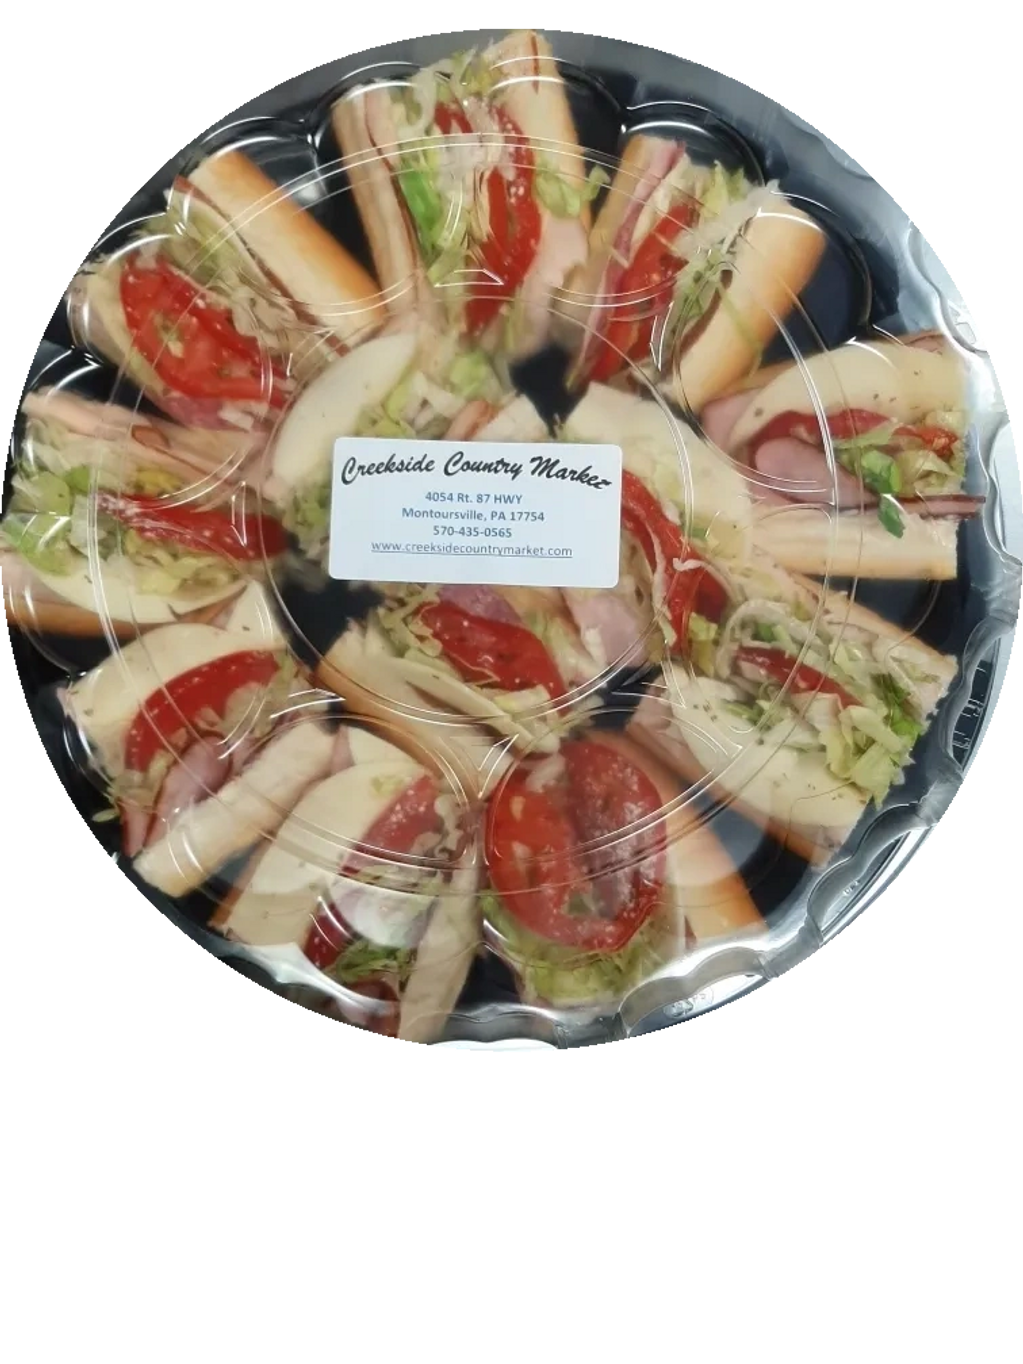 Small sub platter serves 6 to 8 people,  $40